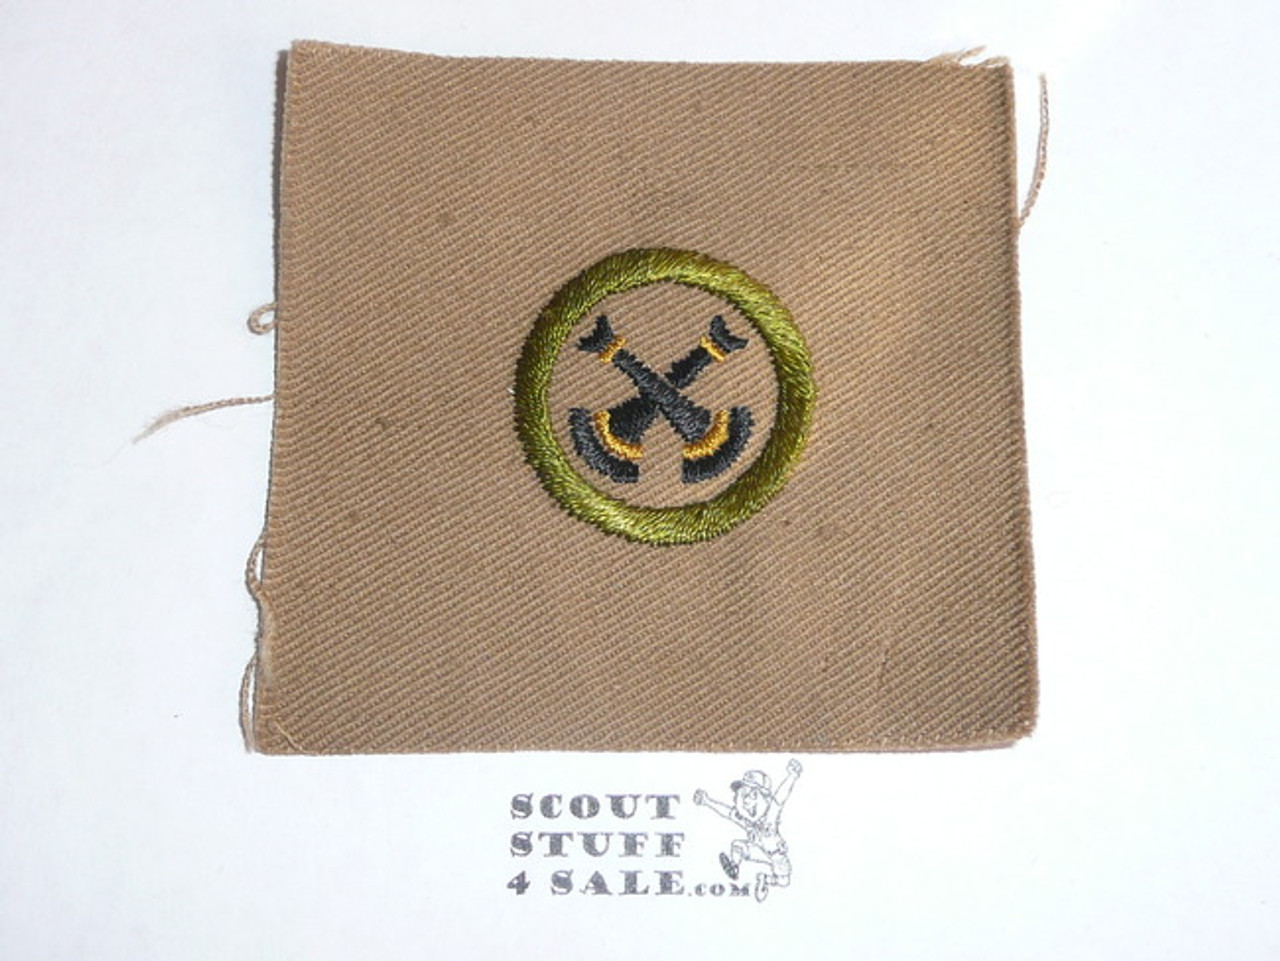 Firemanship - Type A - Square Tan Merit Badge (1911-1933), TEENS variety, brown striped back, huge piece of cloth